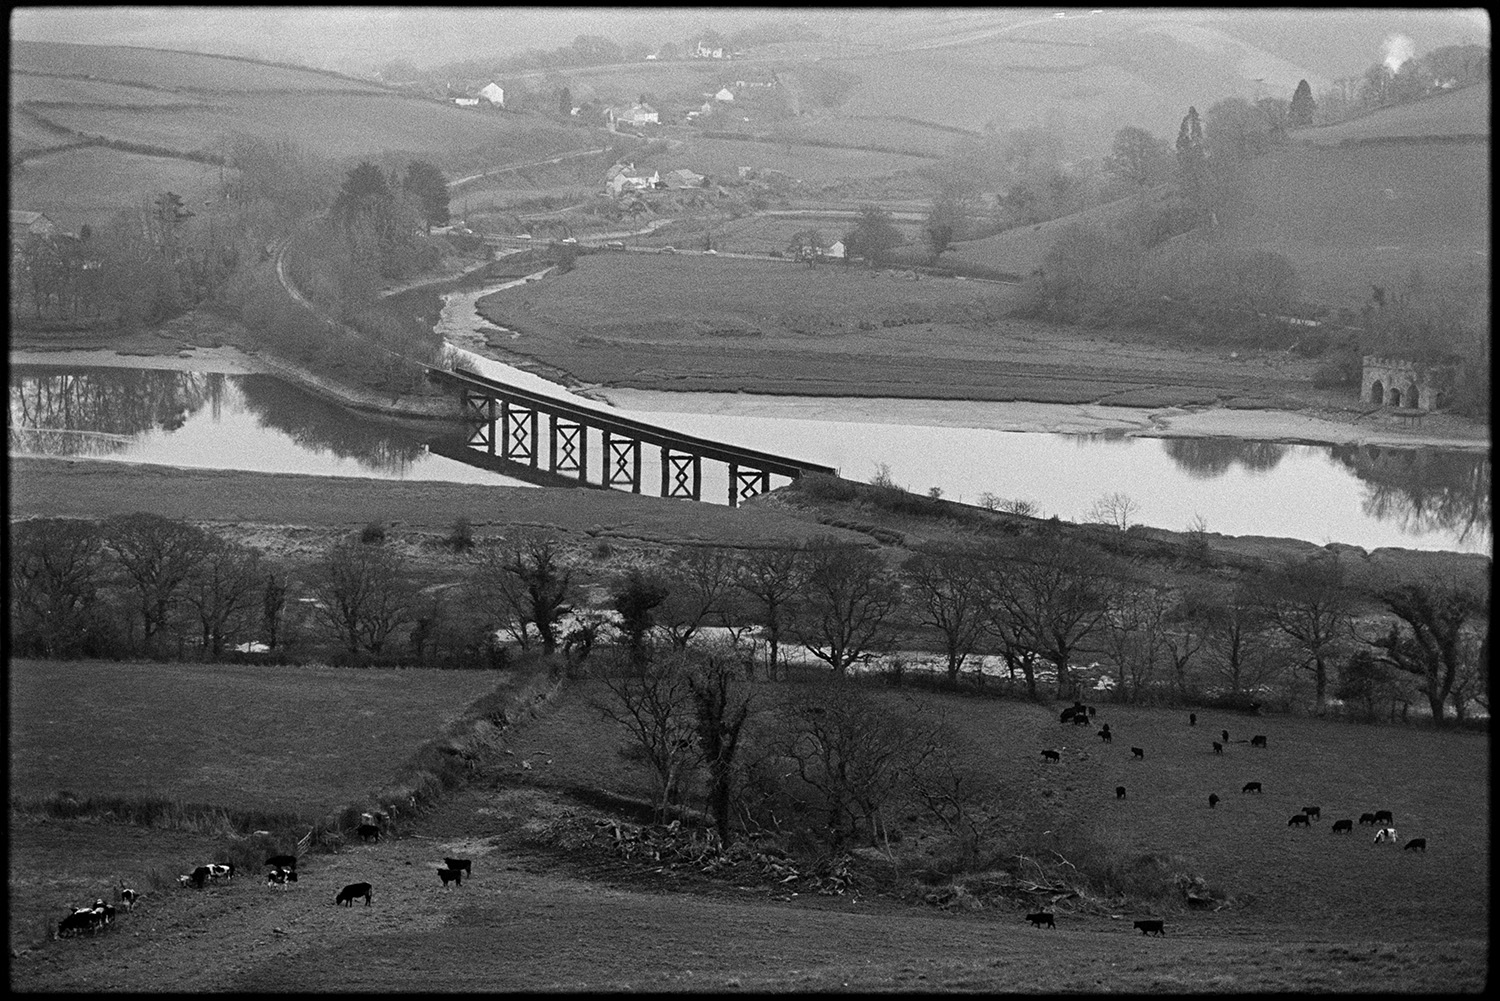 Old railway bridge across river. 
[The railway bridge across the River Torridge at Pillmouth, Landcross. Cattle are grazing in a field in the foreground and a landscape with fields, trees, houses and a castellated building is visible in the background.]